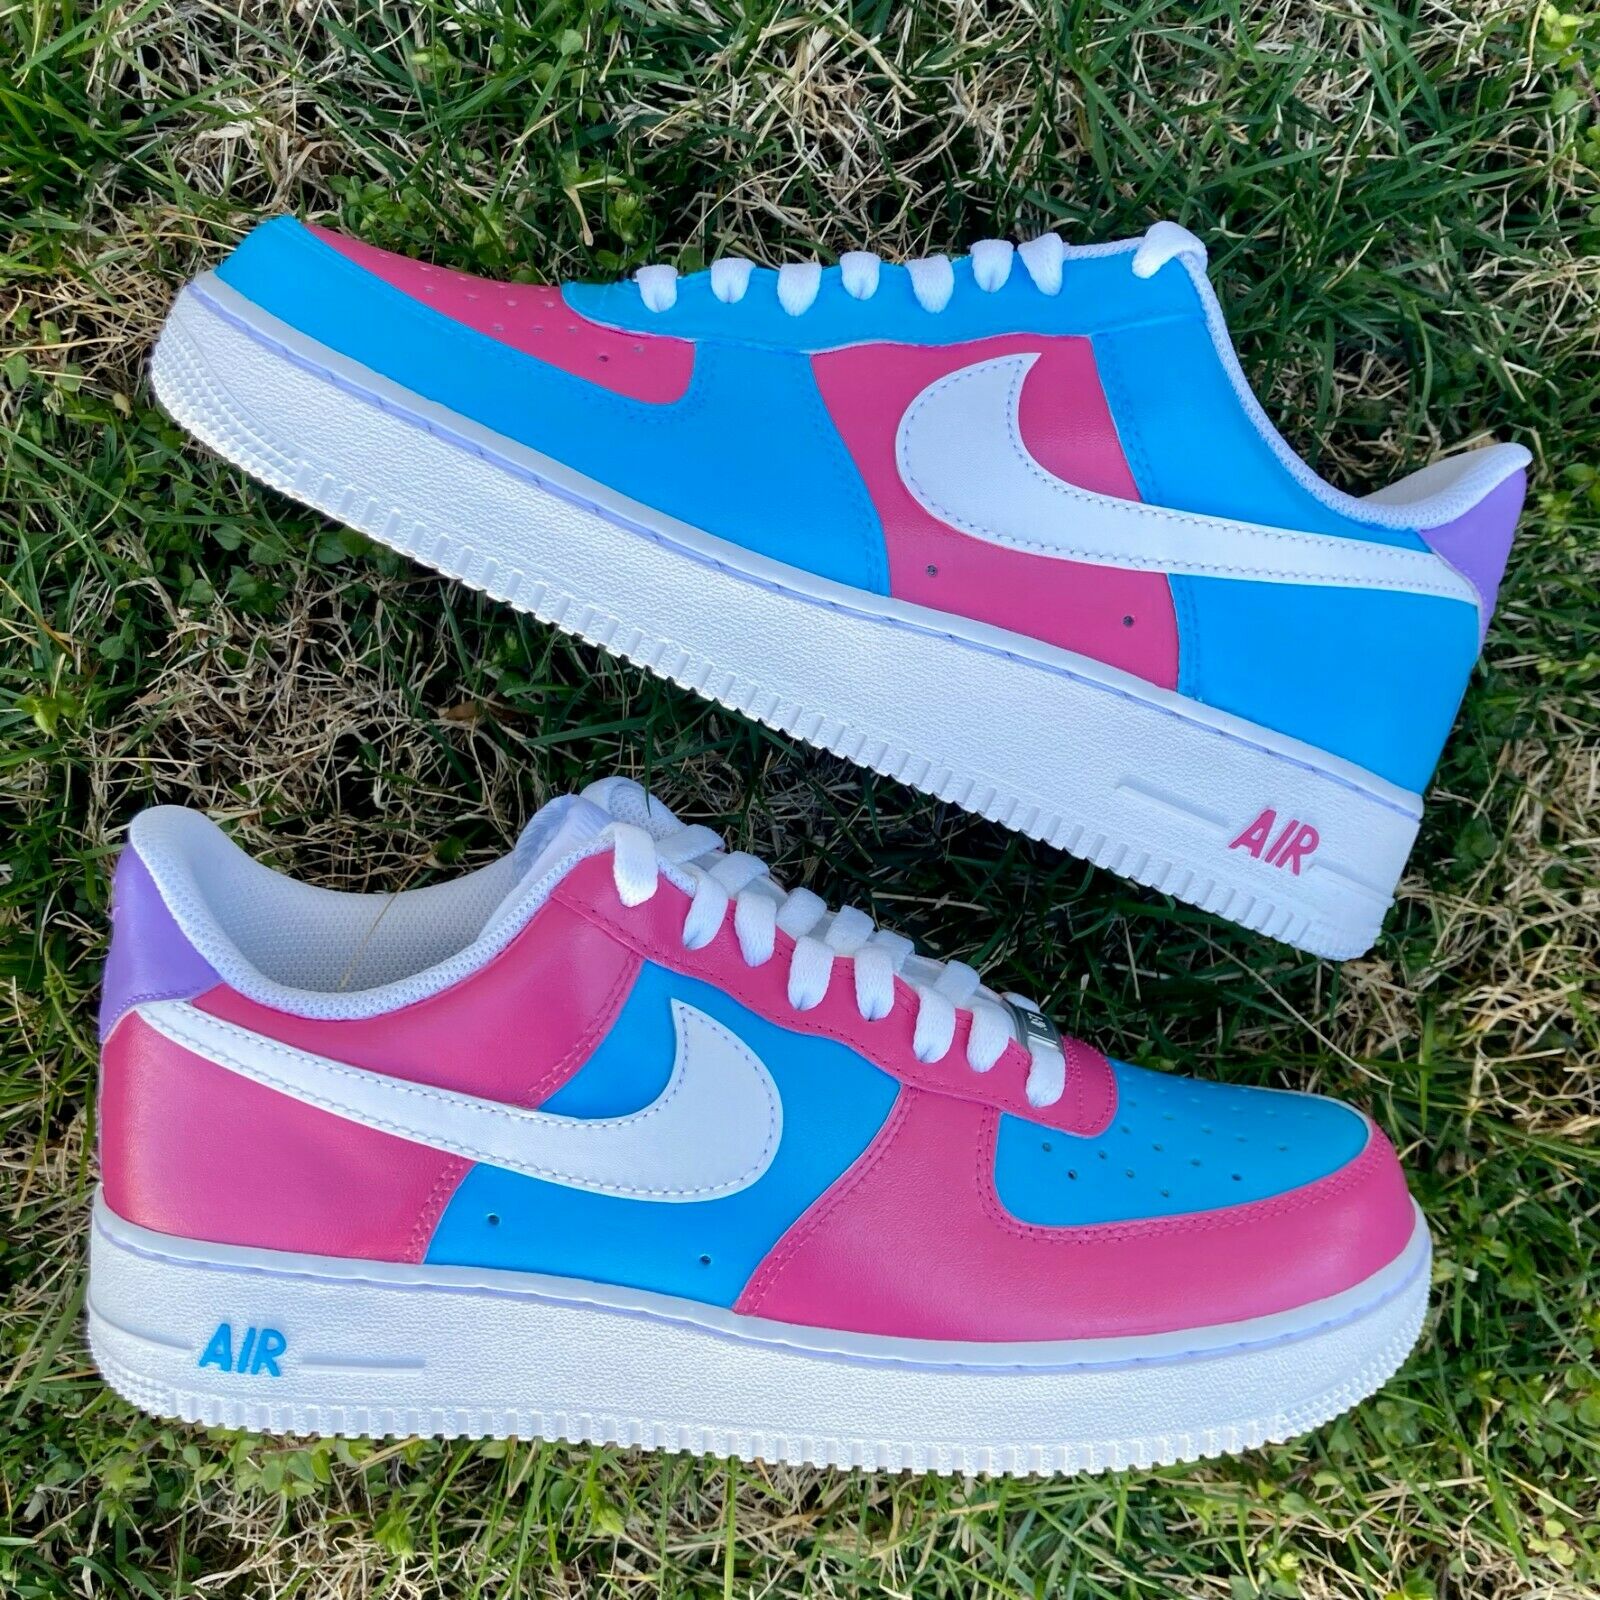 Air Force 1 Custom Cotton Candy Low Inverted Shoes Pink Blue Womens Kids 7.5 Mens (9 Women's)